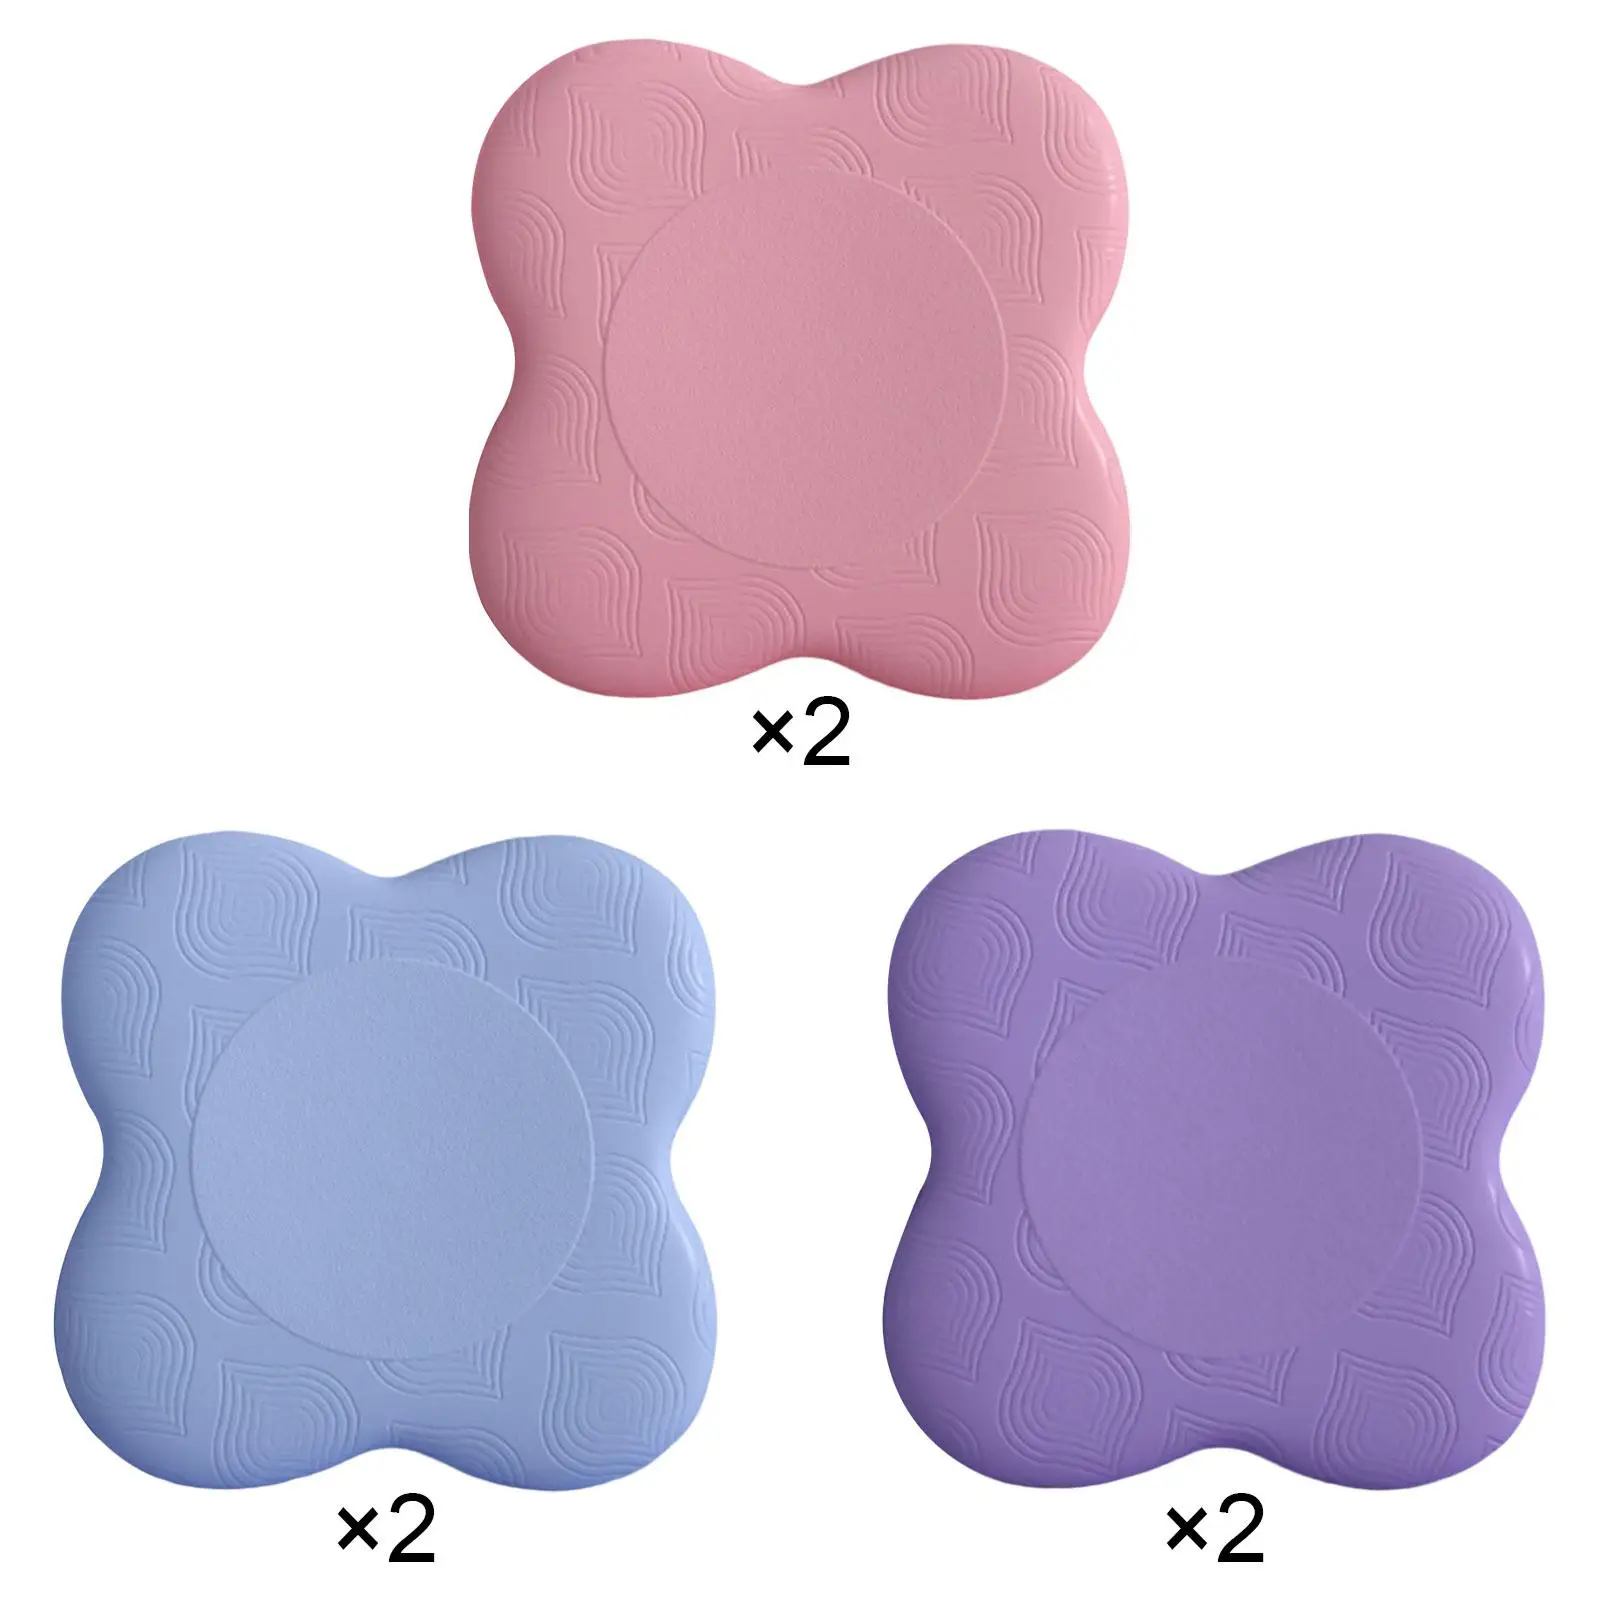 2x Yoga Knee Pad Cushion Yoga Elbow Mat Non Slip Kneeling Support Balance Cushion for Elbow Ankle Knee Hands Pilates